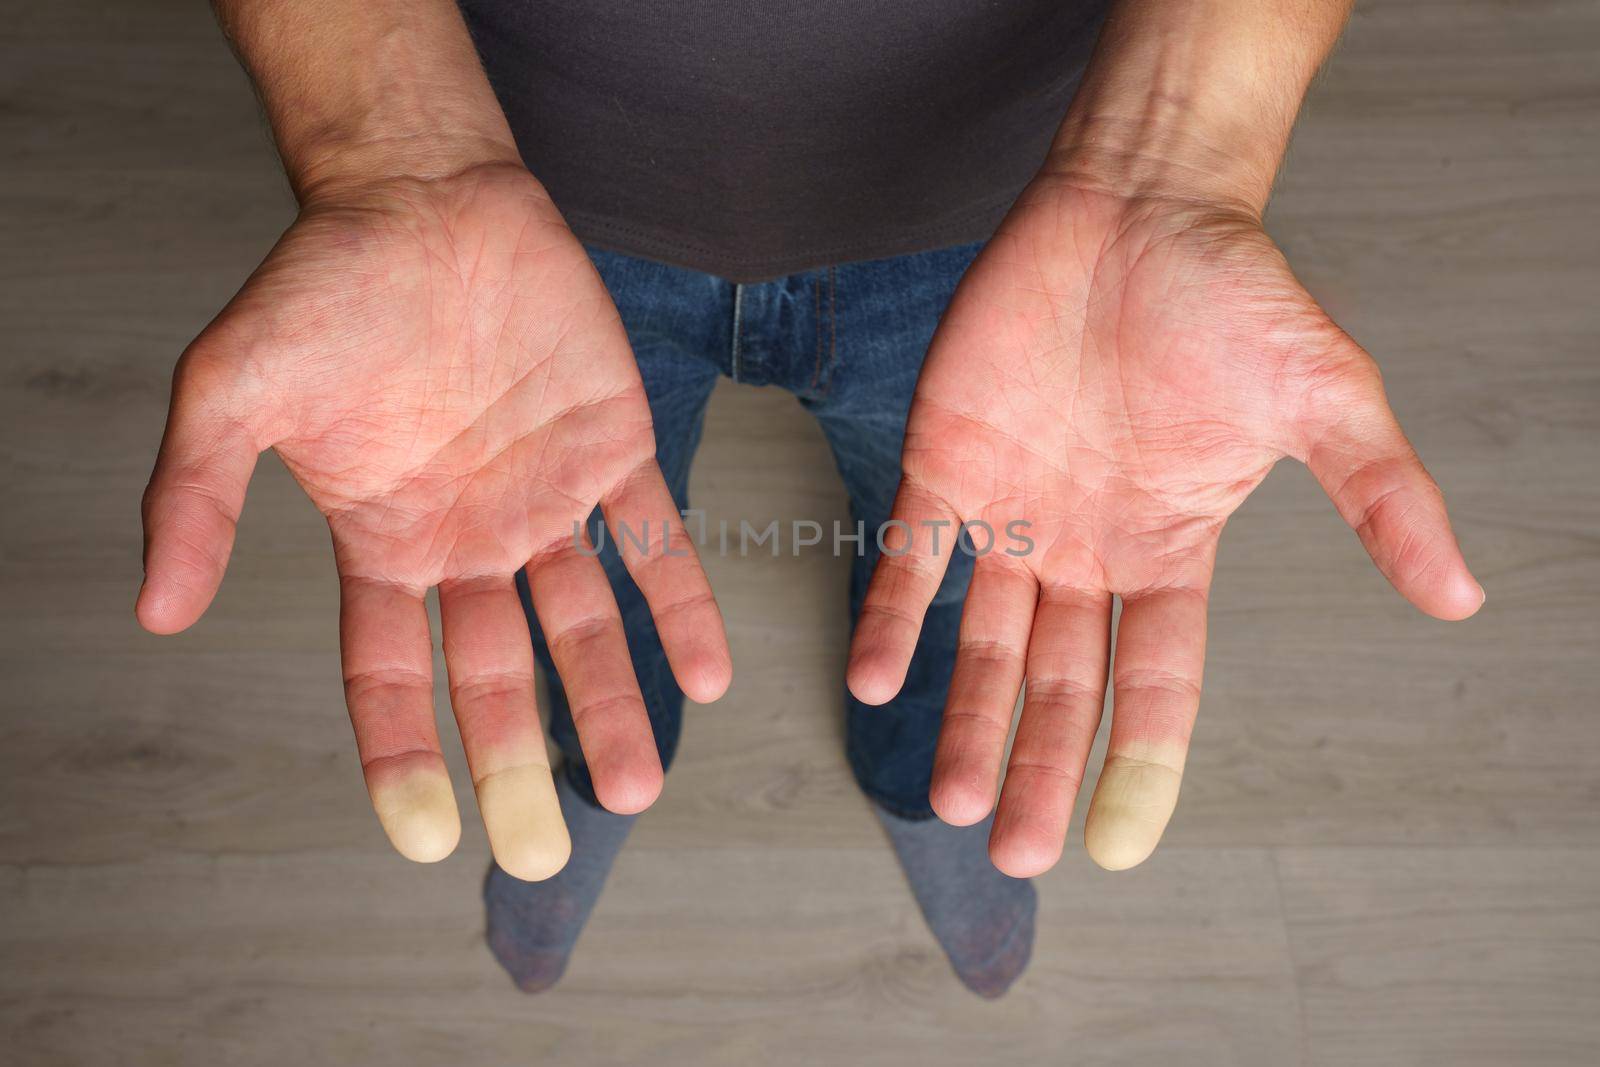 Man showing hands with Raynaud syndrome, Raynaud's phenomenon or Raynaud's disease. High quality photo